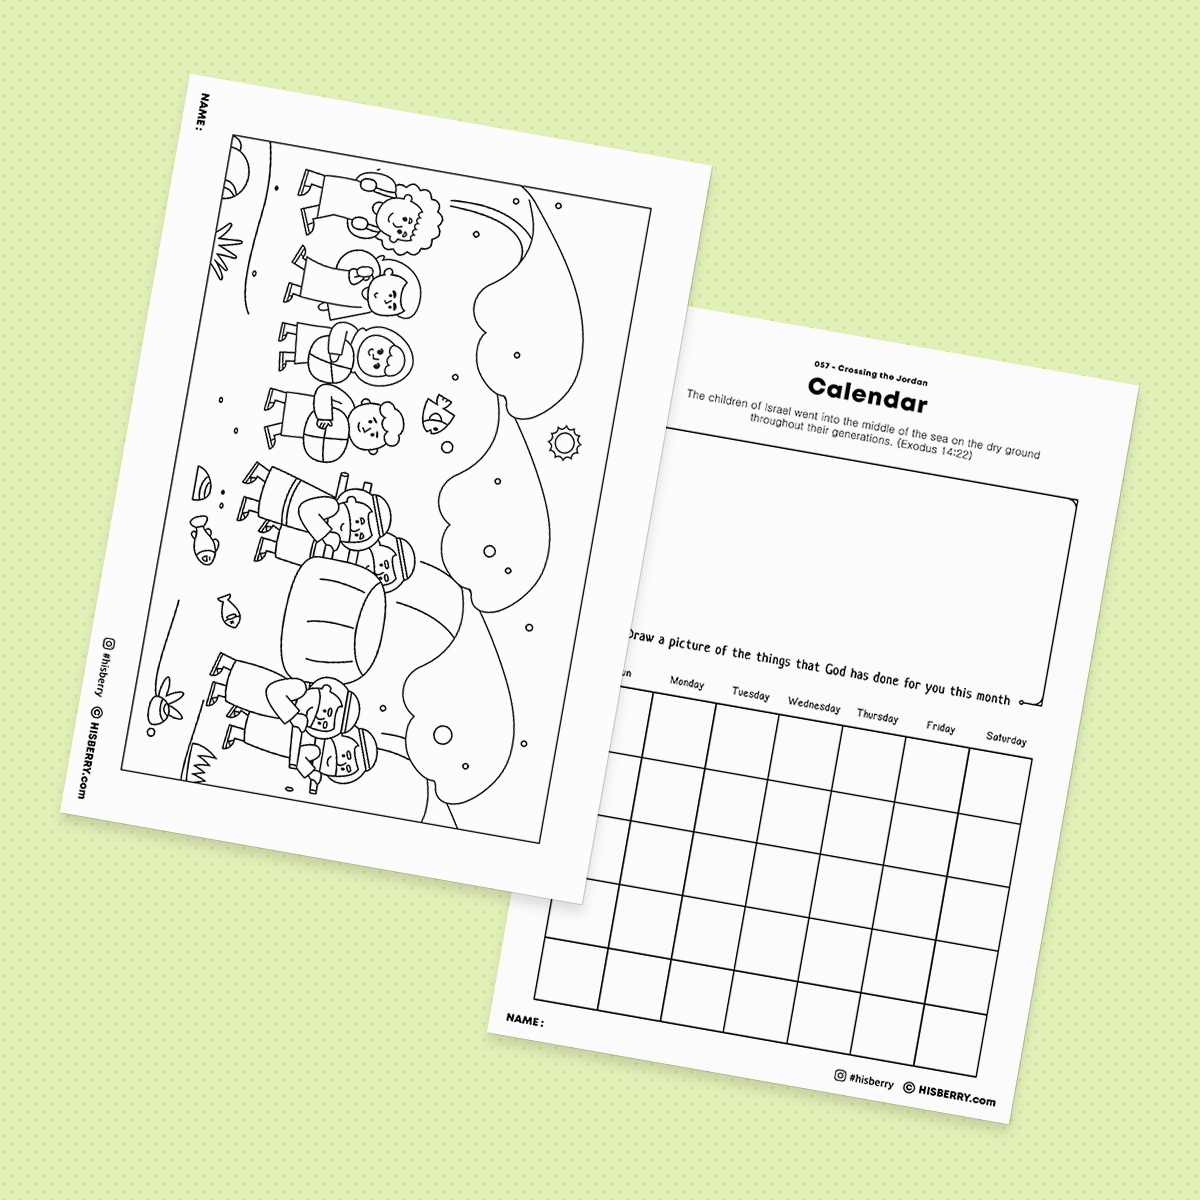 Crossing-the-Jordan-Bible-drawing-Coloring-pages-printables